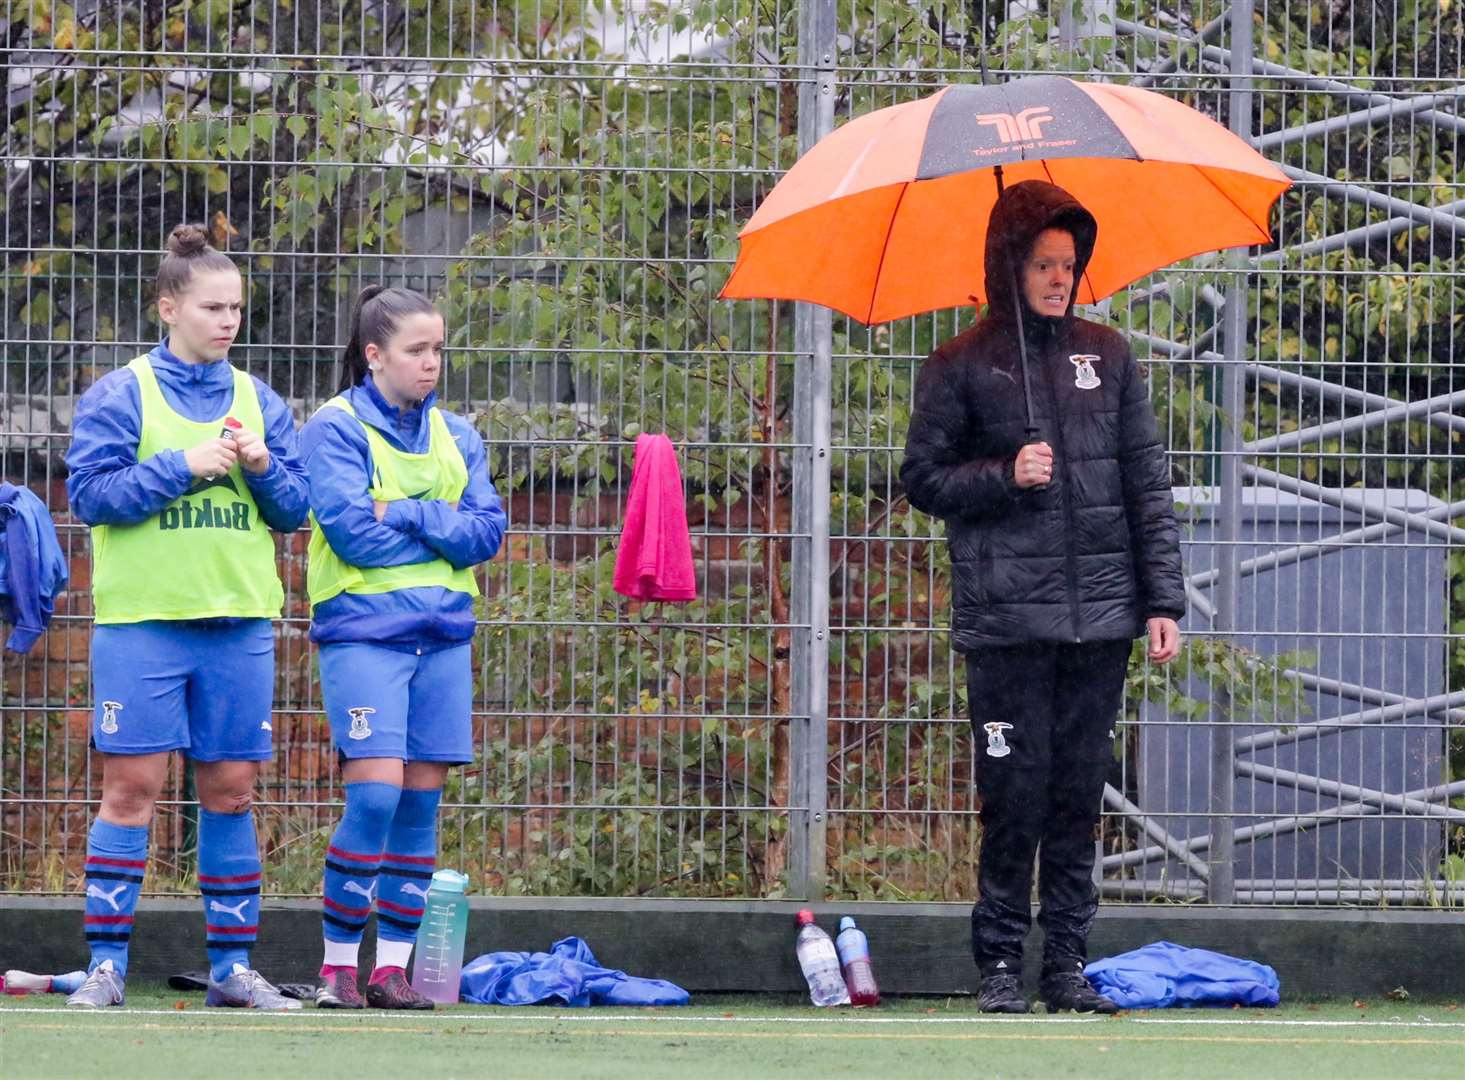 ICT WFC v East Fife GWFC, SWF Championship, on 08 October 2023 at Milburn Academy in Inverness, Scotland Pictured: Inverness Caledonian Thistle WFC's Manager Karen Mason (photo by Donald Cameron / Sportpix / Sipa USA)